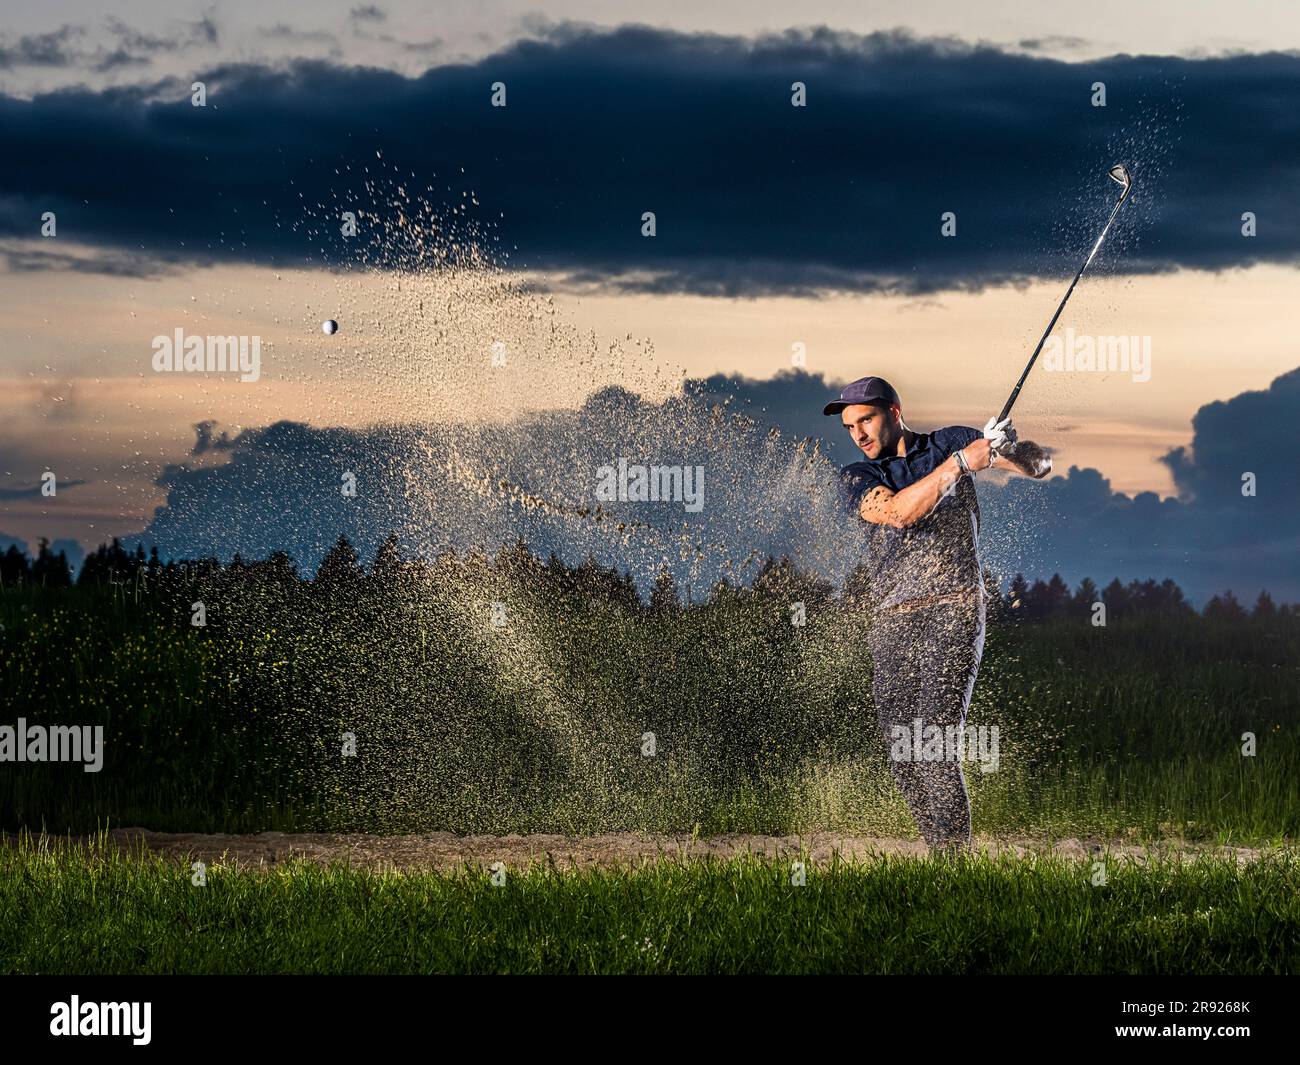 Man playing golf with club sanding on grass at dusk Stock Photo